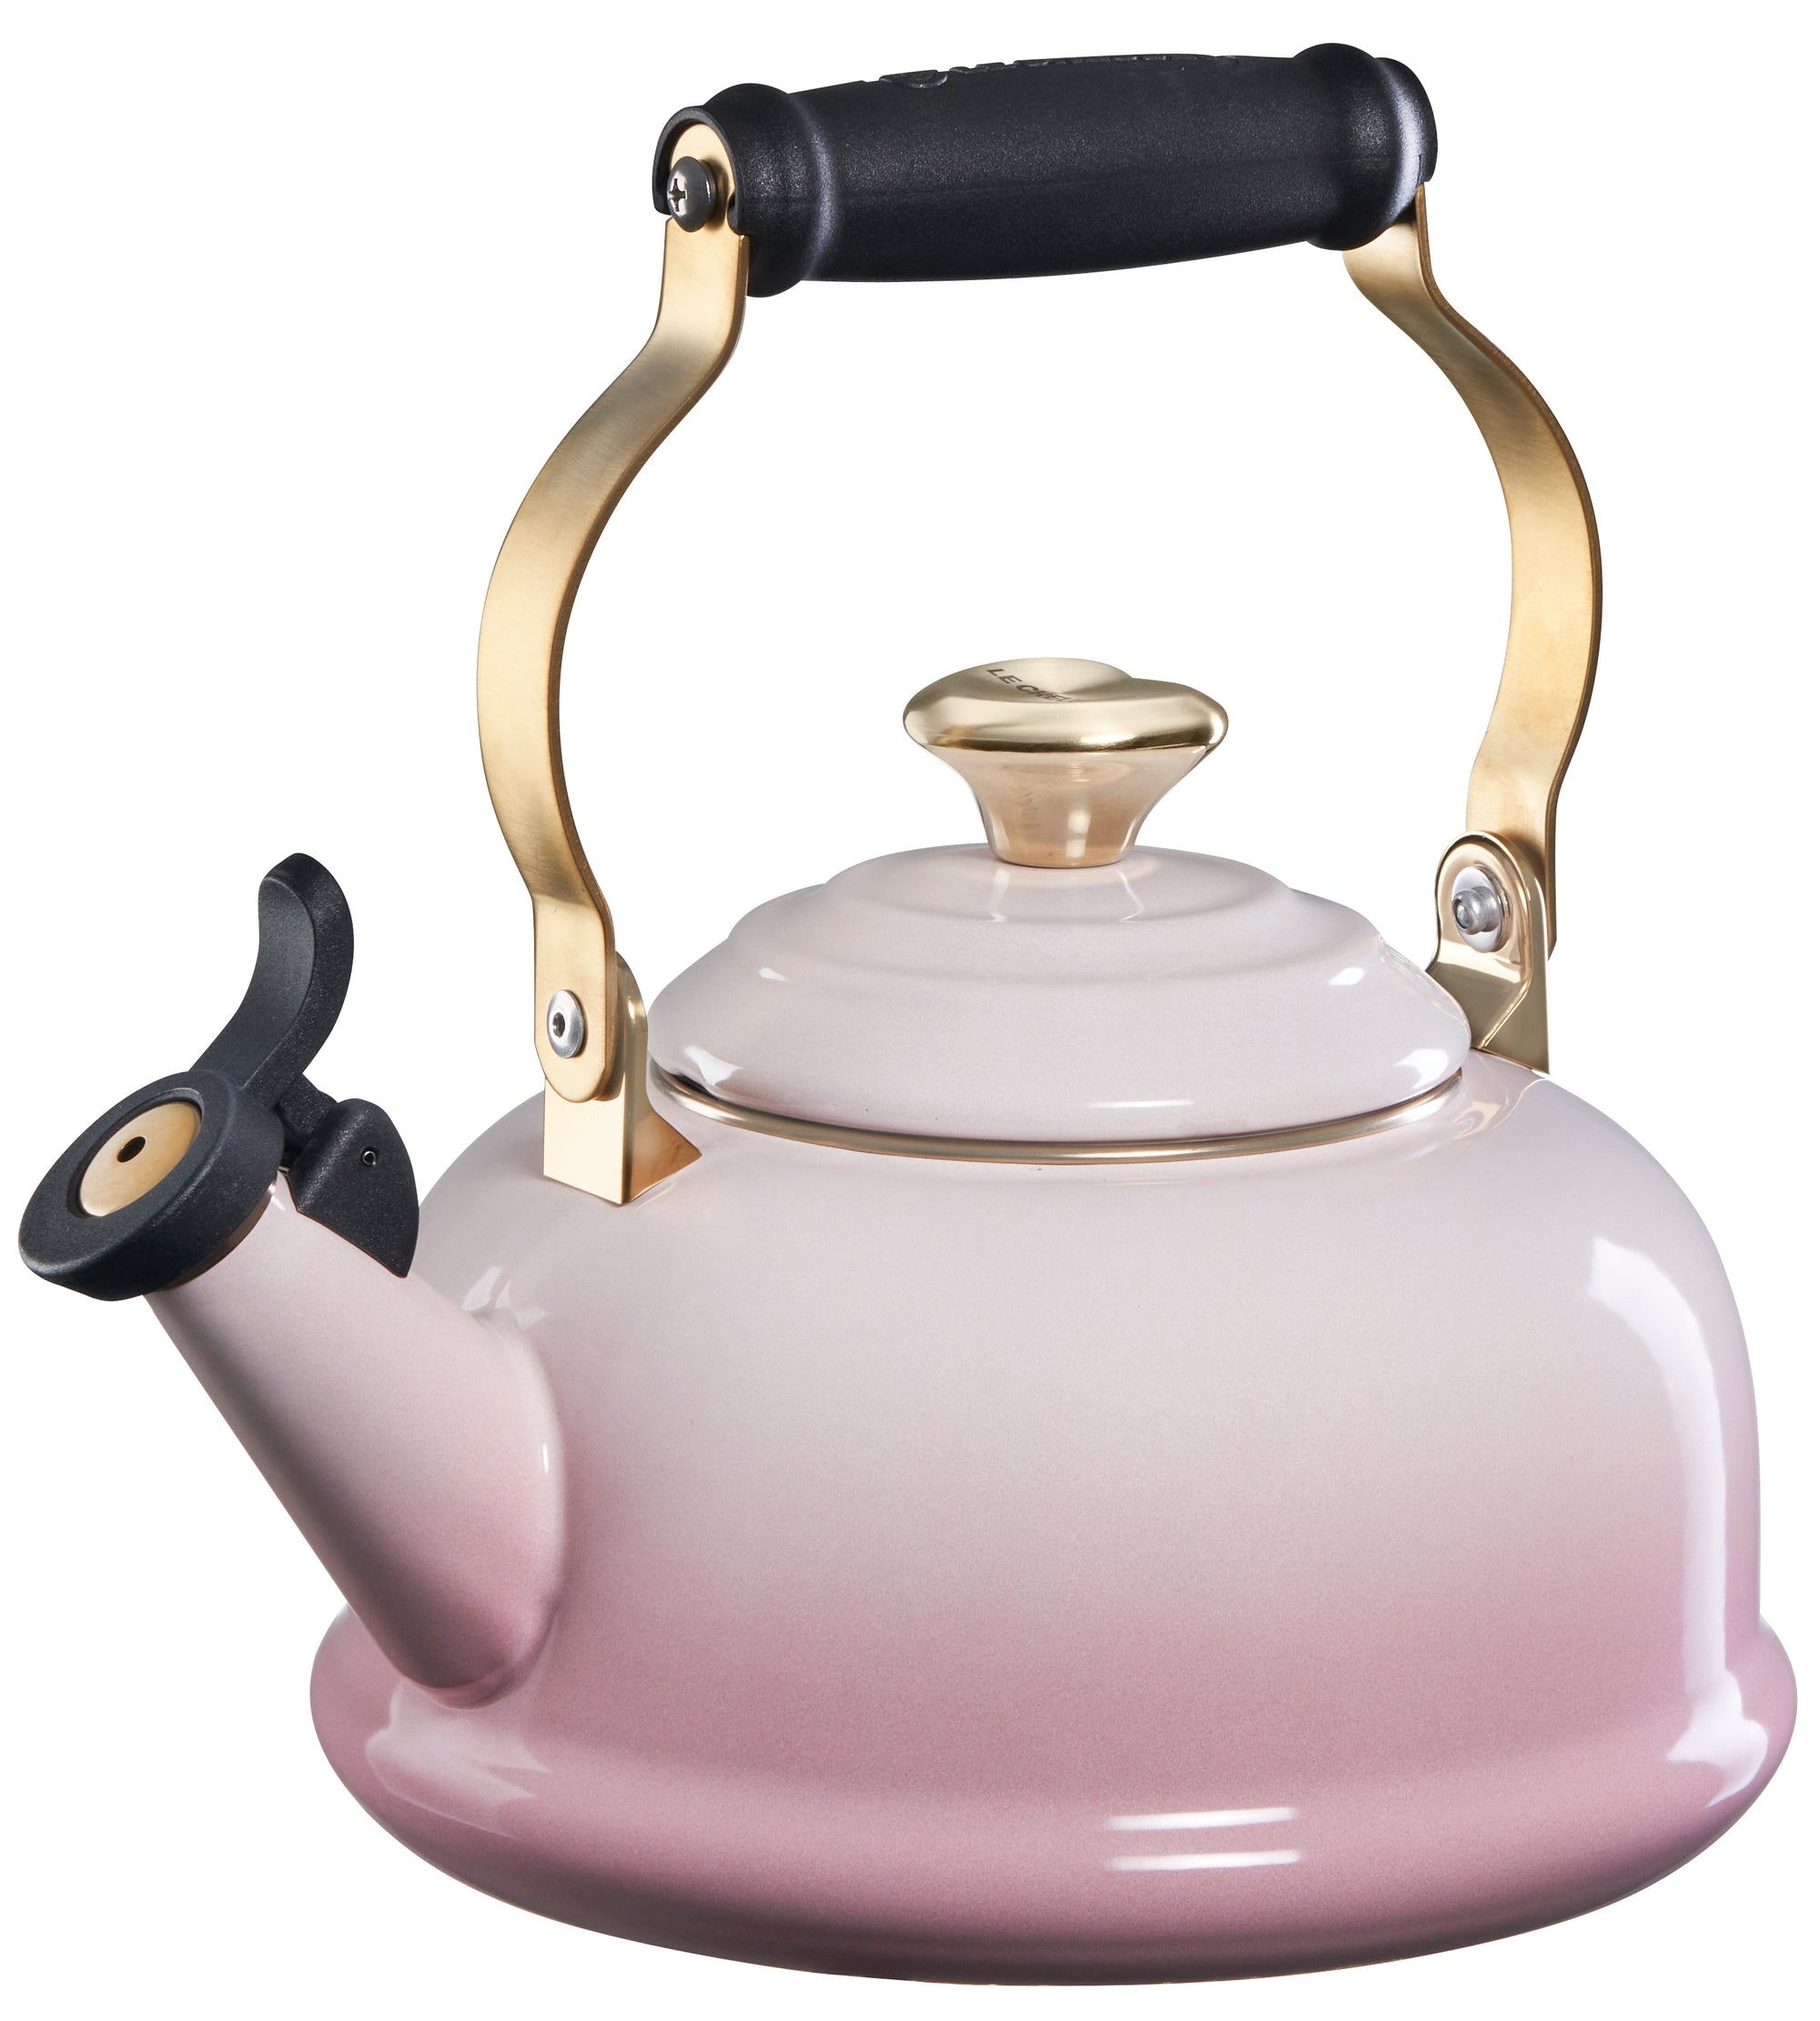 Le Creuset Whistling Kettle - Shell Pink with Gold Heart Knob